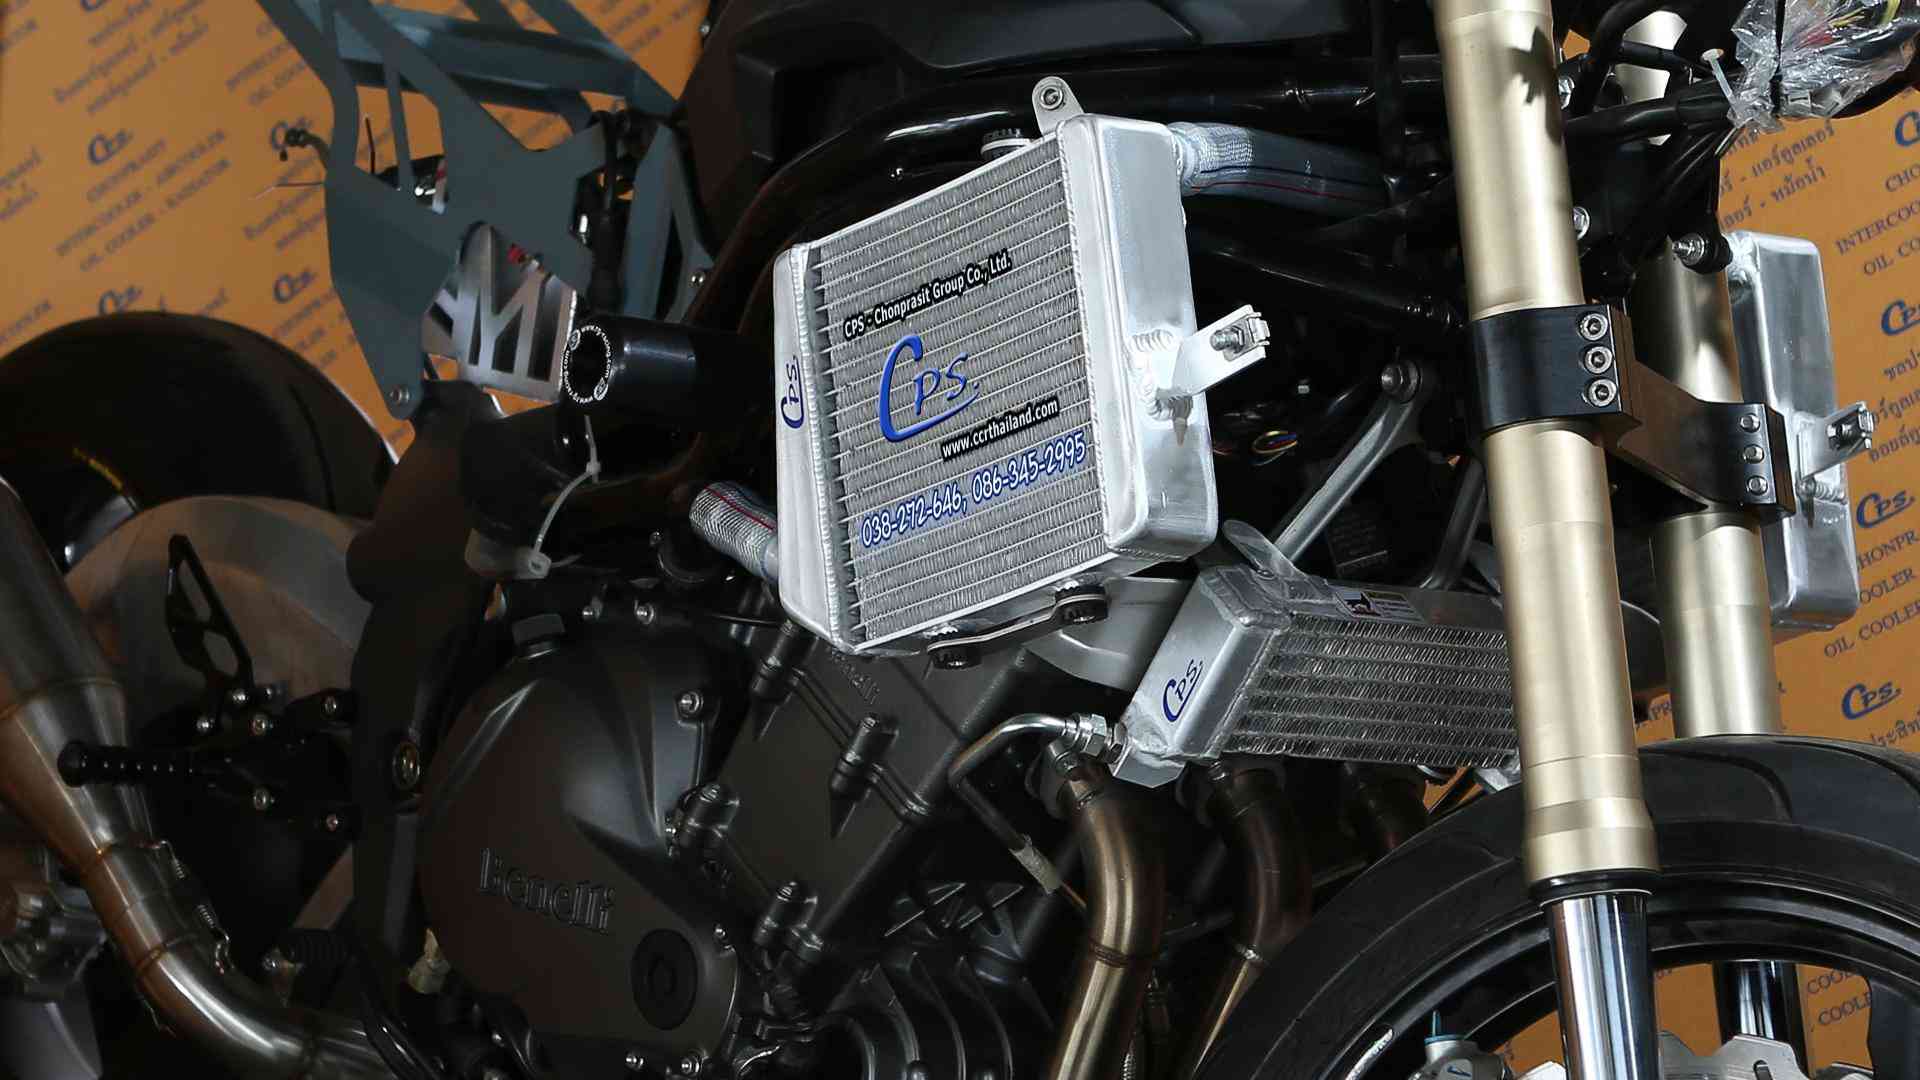 CPS motorcycle radiator for benelli motorcycle with oil cooler